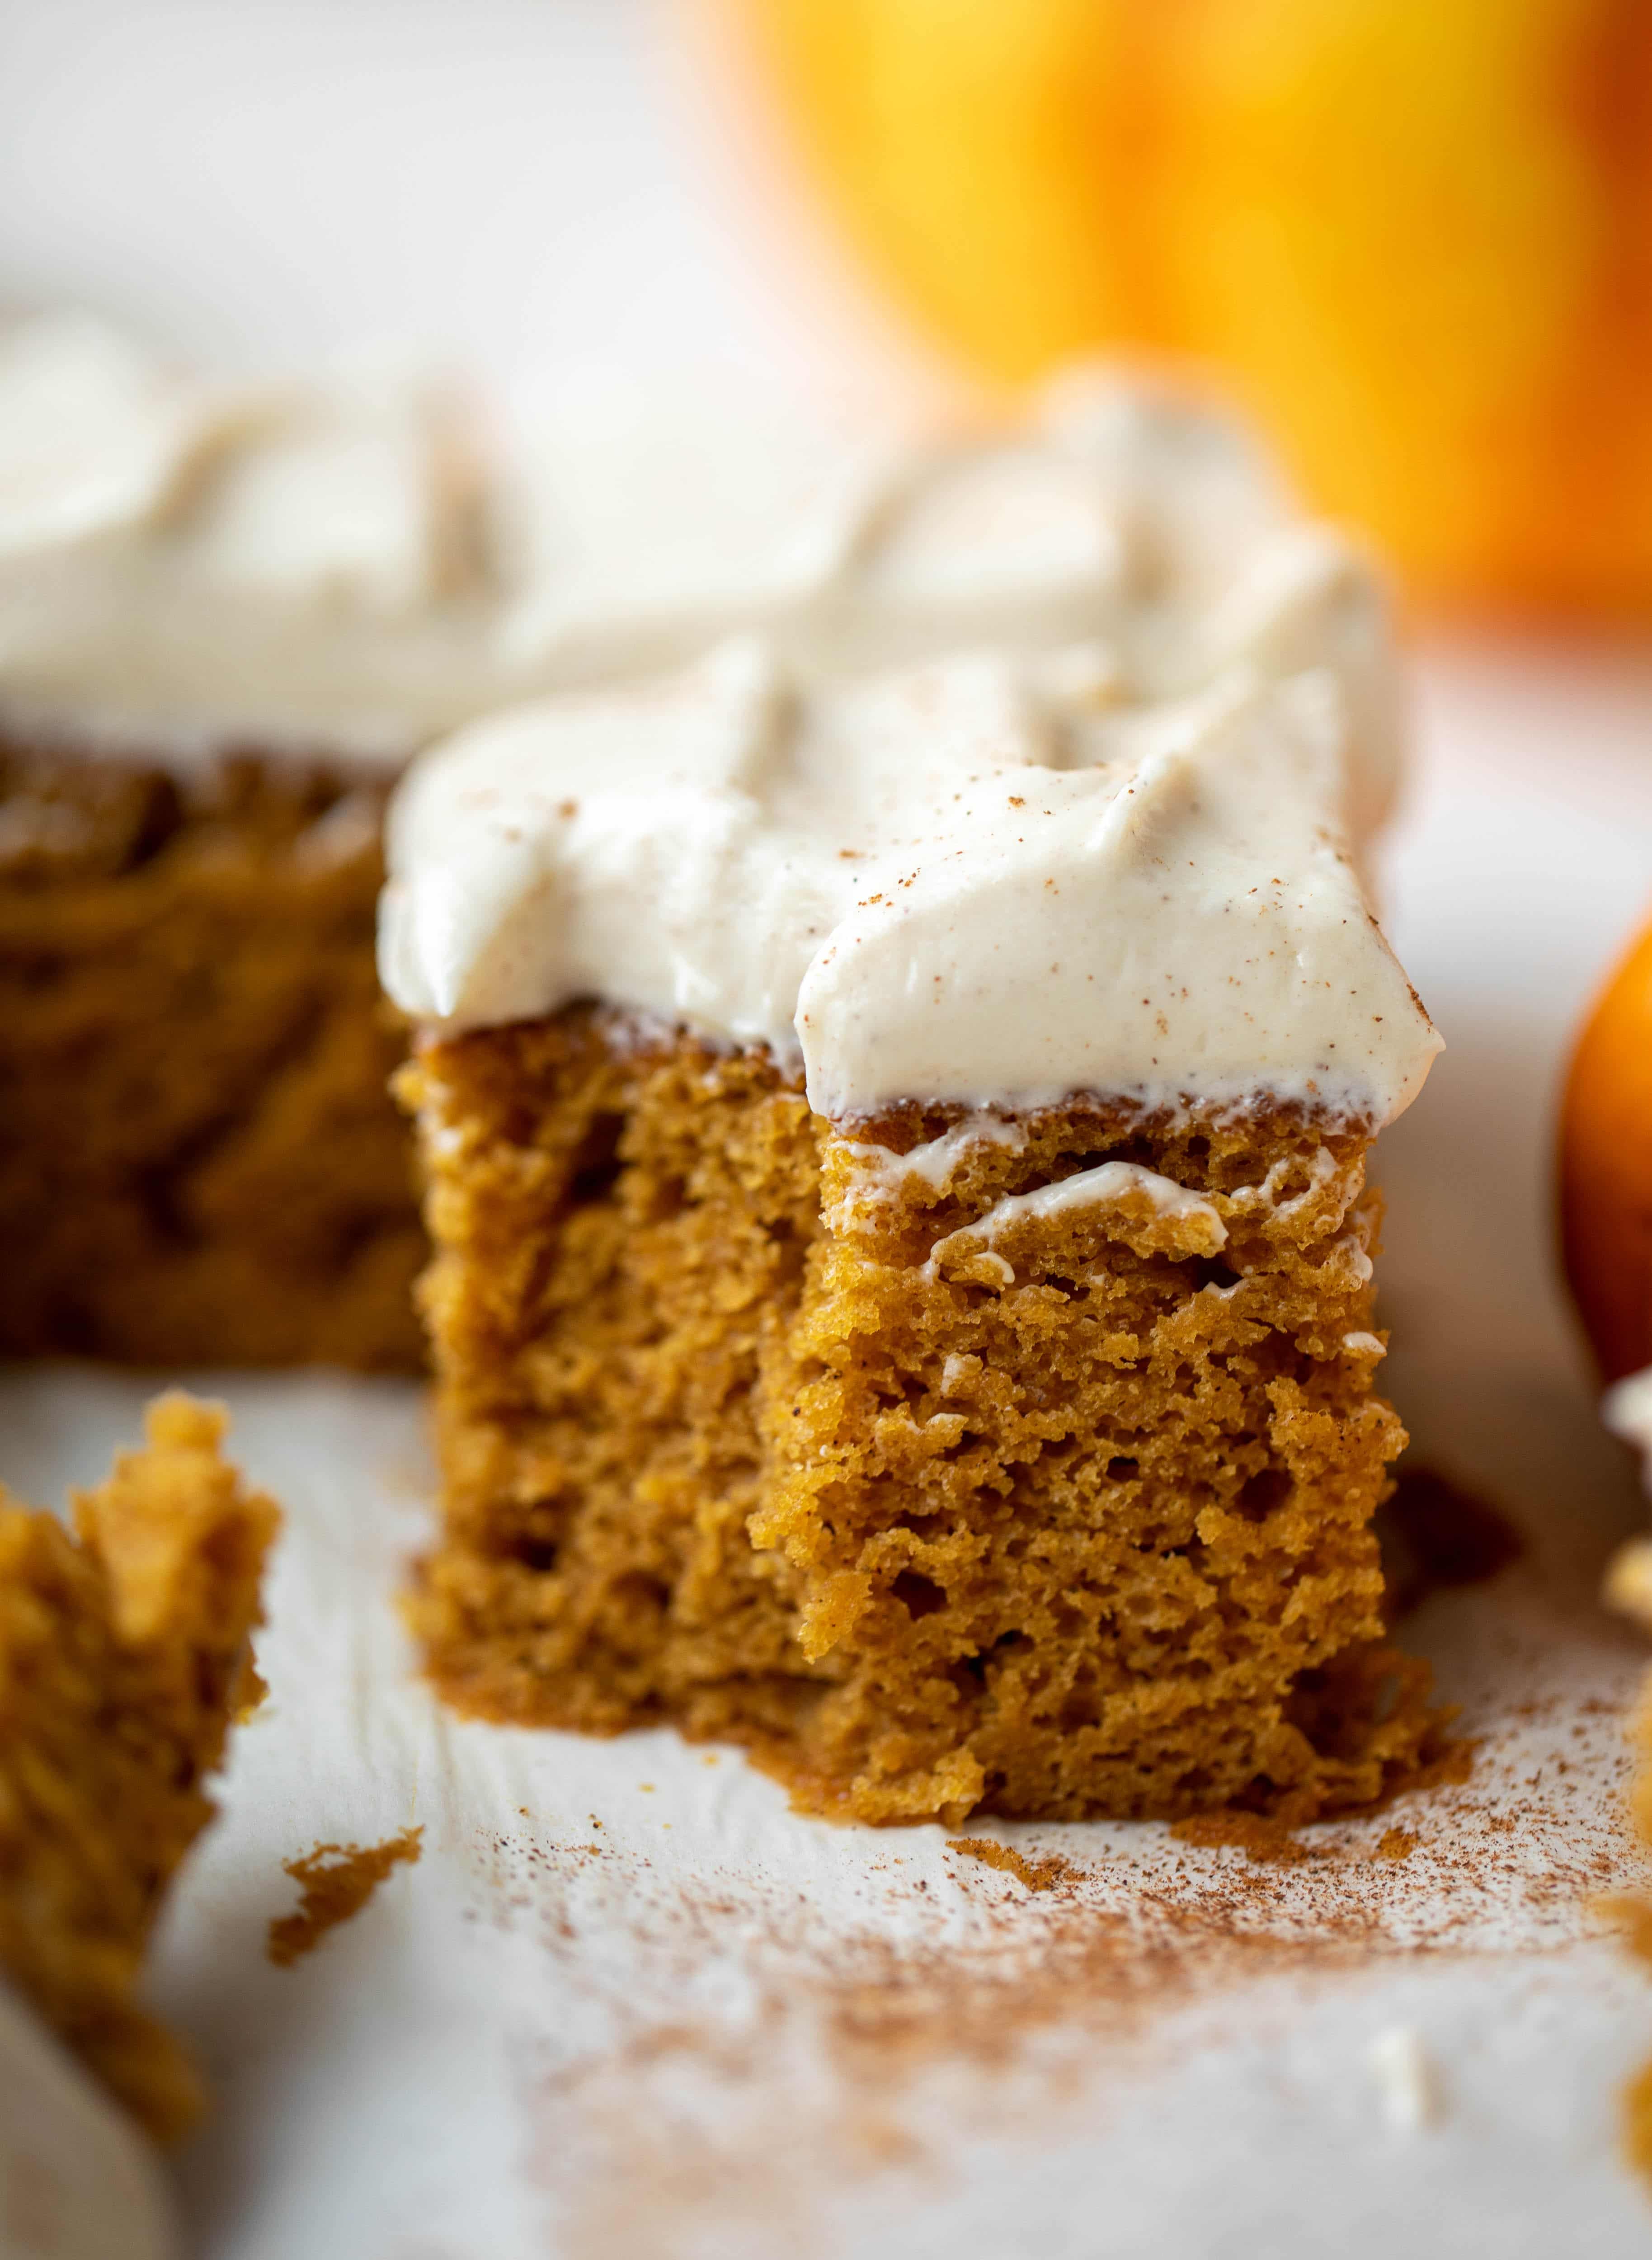 This pumpkin sheet cake is a legit pumpkin dream cake! It's so moist and fluffy and flavorful. With a blanket of cinnamon cream cheese frosting!